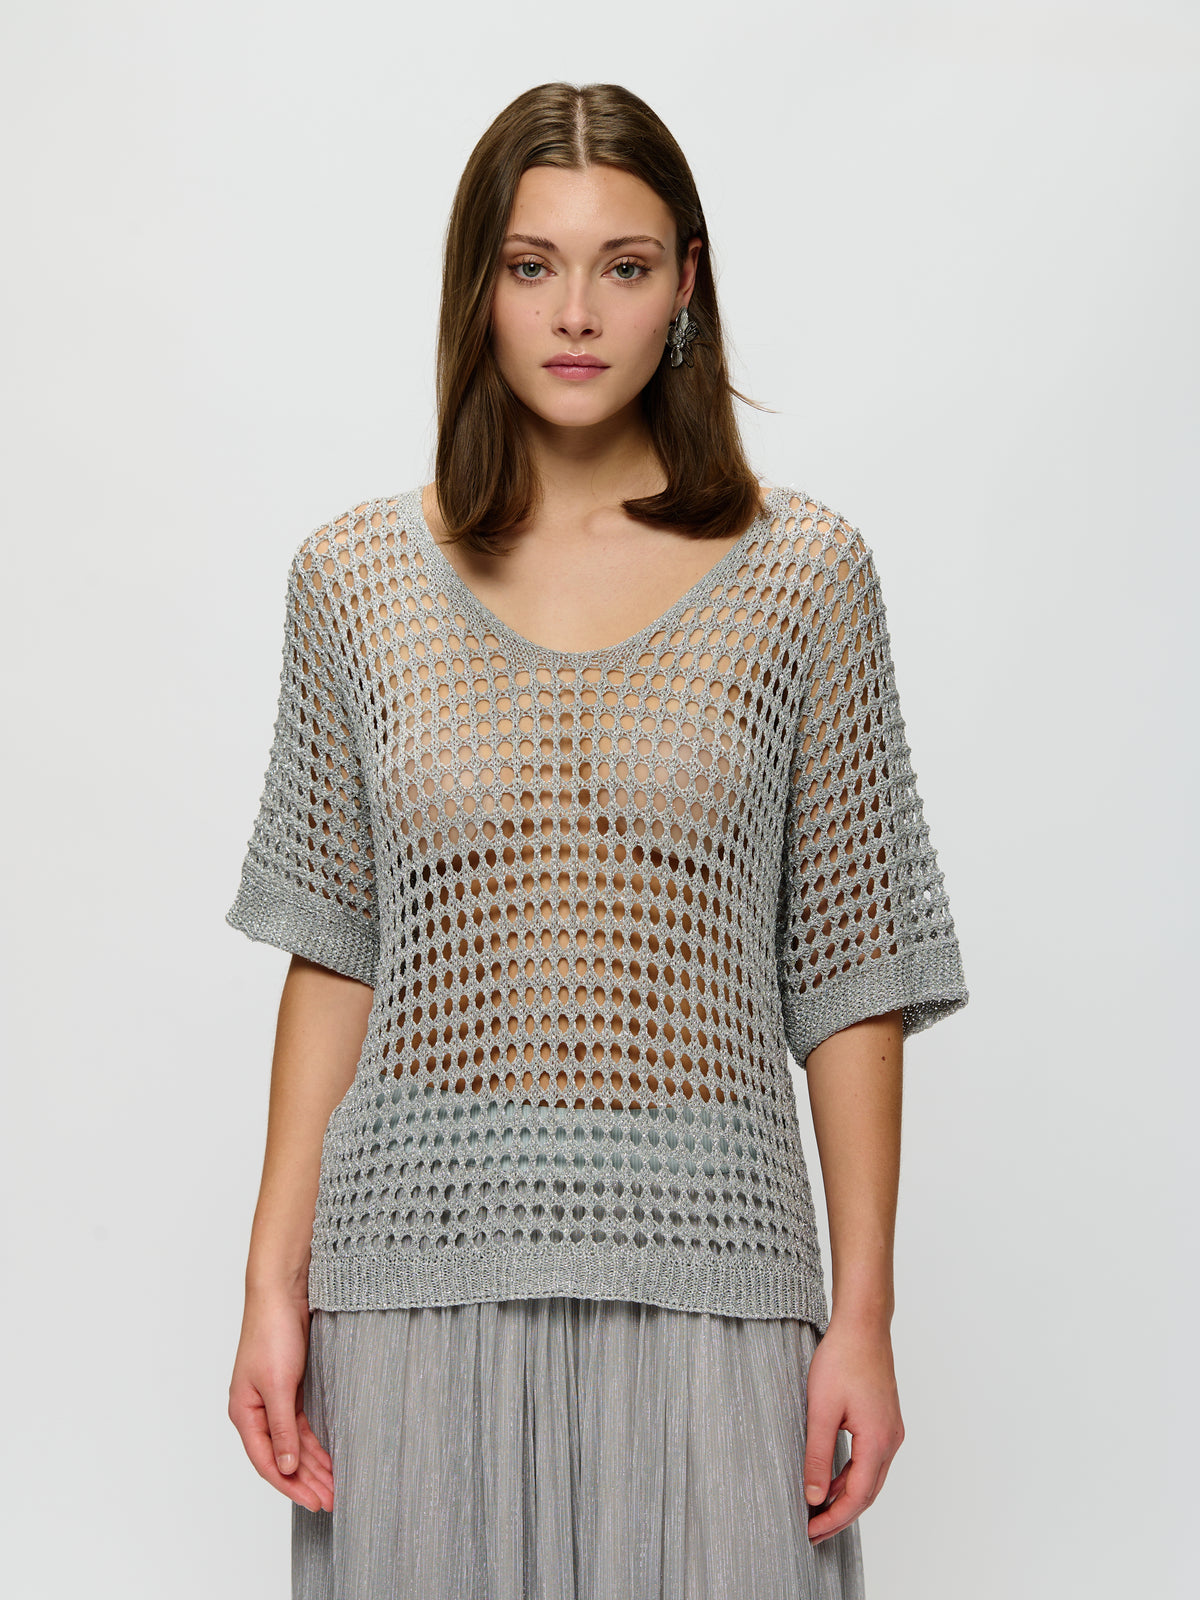 Crochet T-Shirt With Dolman Sleeves